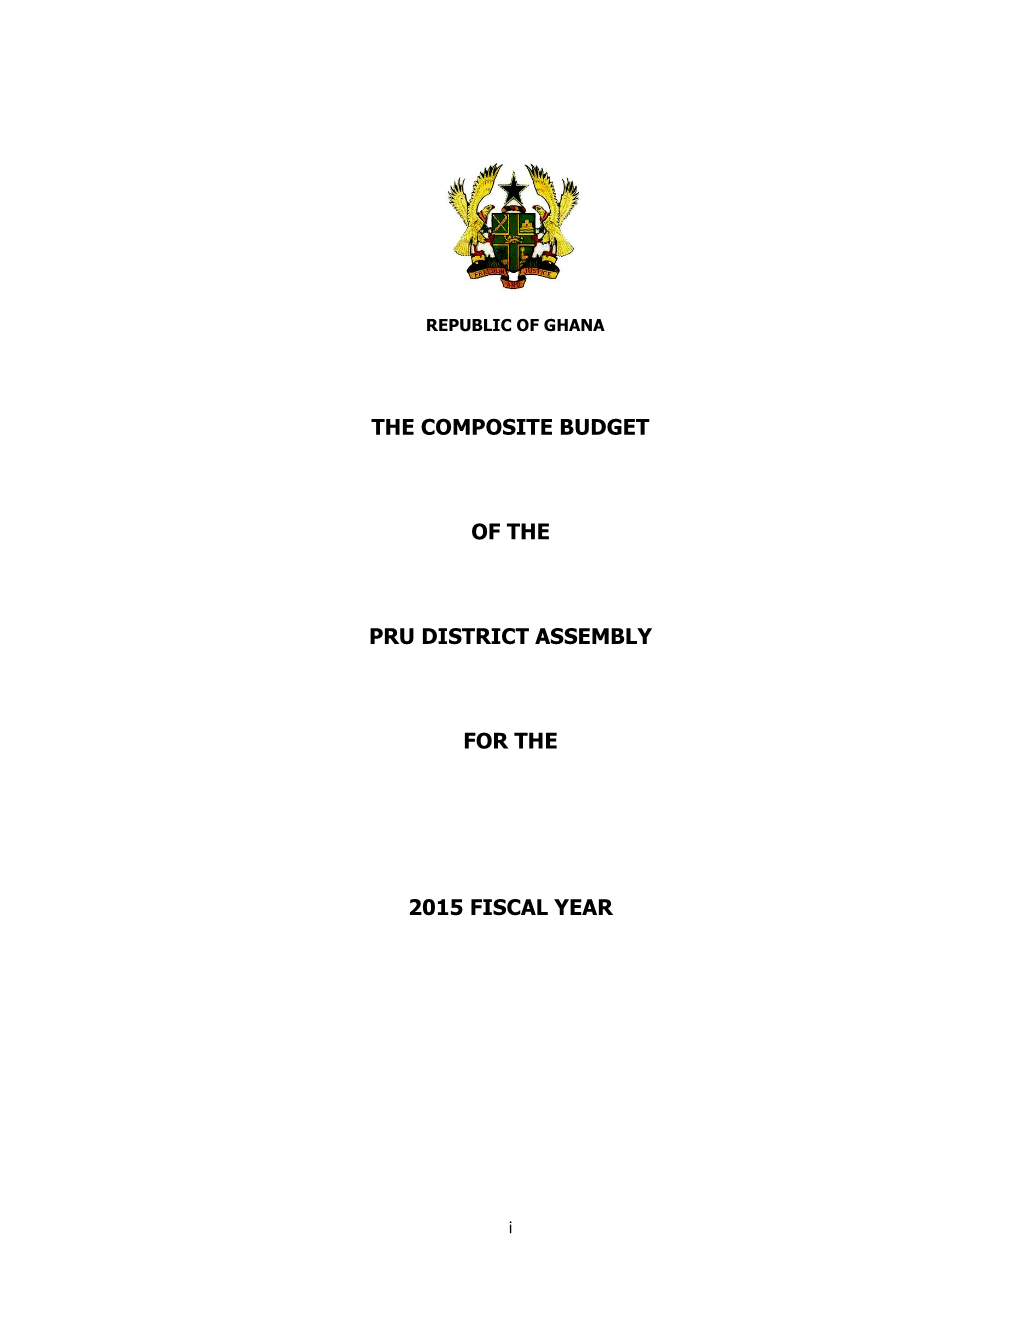 The Composite Budget of the Pru District Assembly for the 2015 Fiscal Year